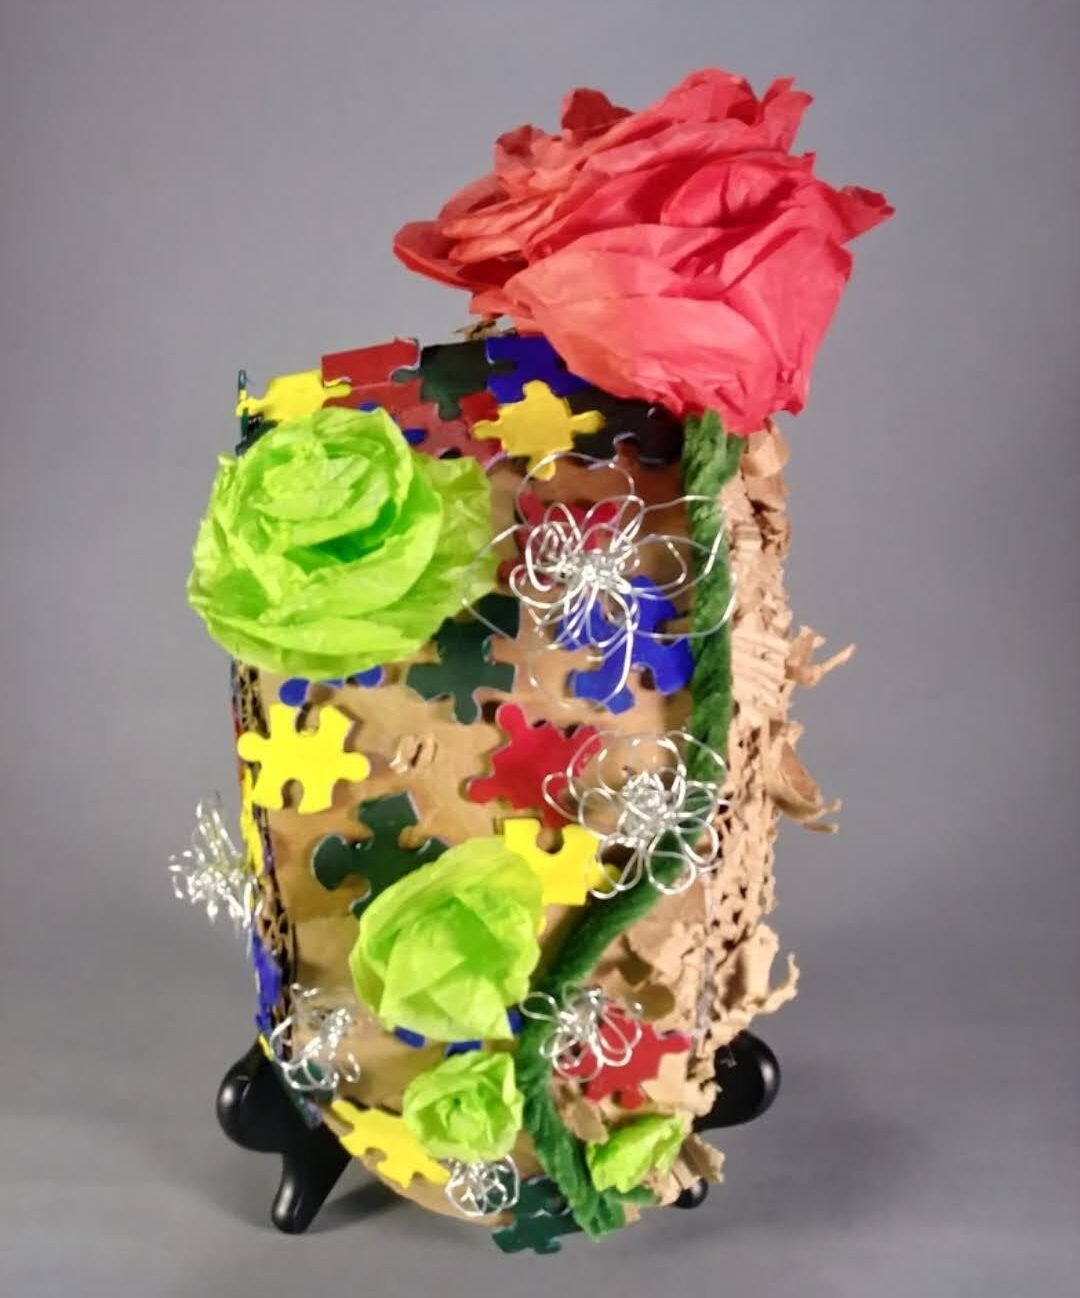 A sculpture of a mask with many various colored puzzle pieces, and a flower made of tissue paper wrapping around it.